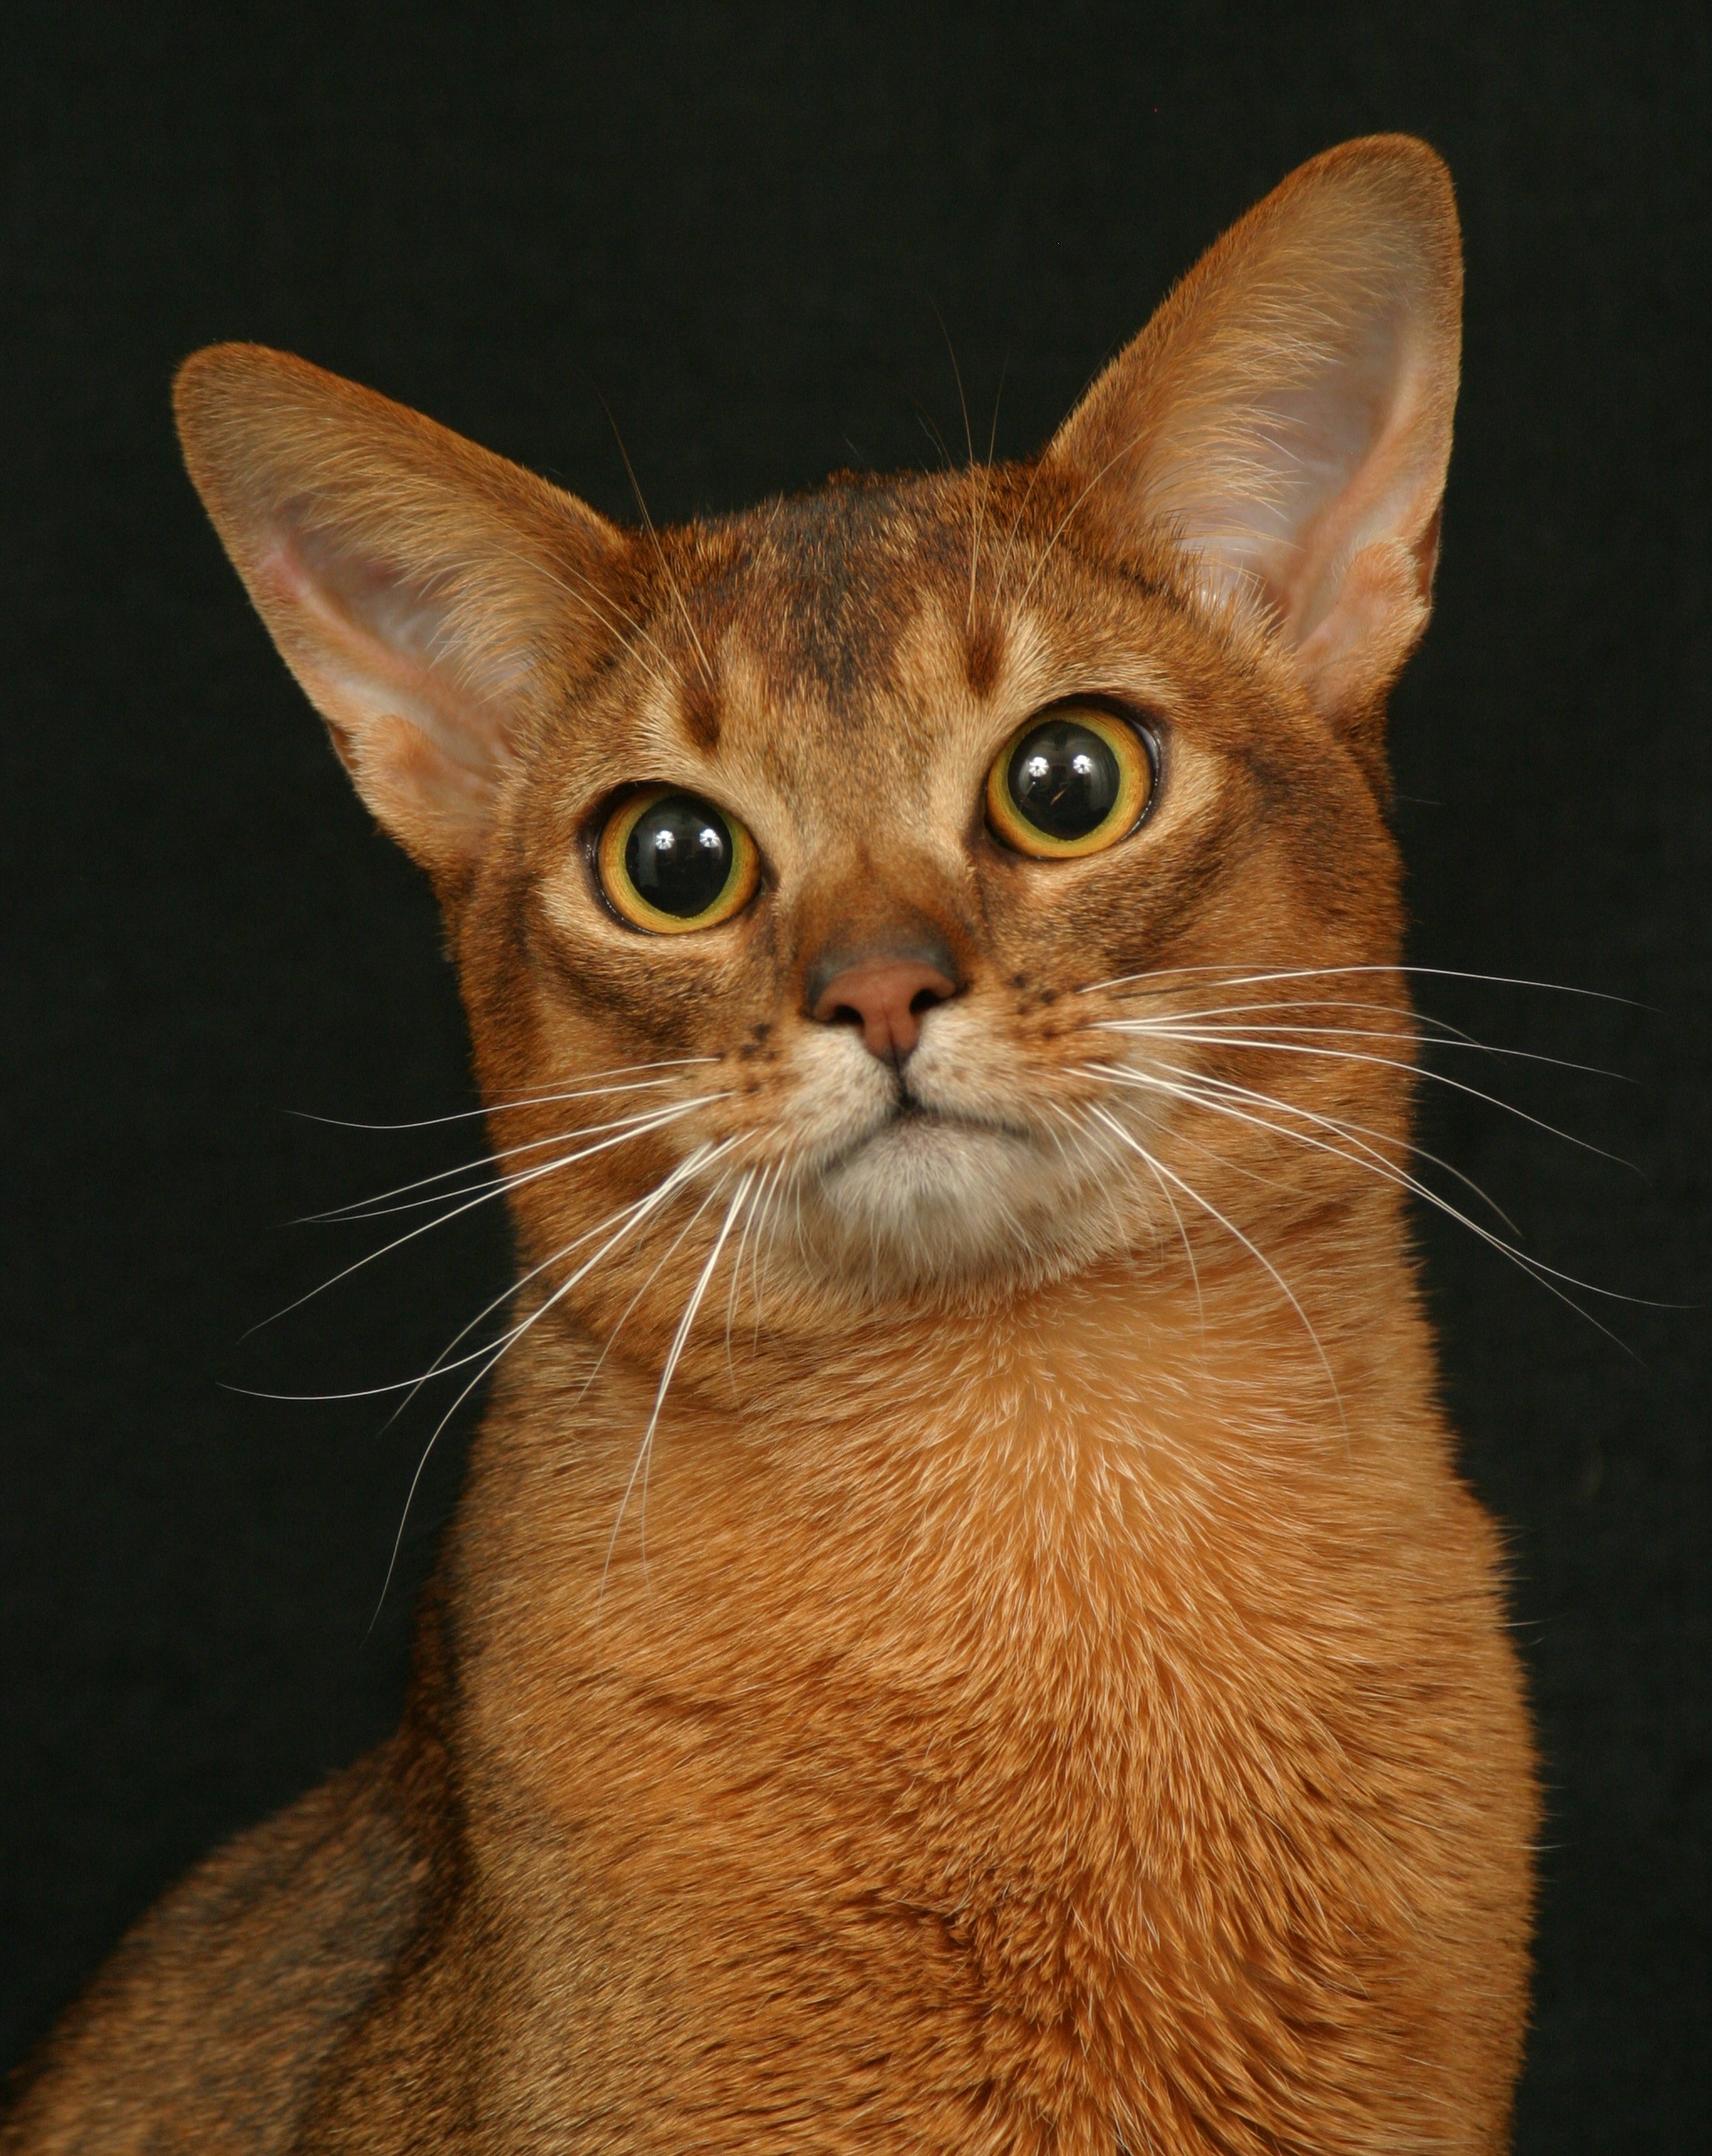 Abyssinian face
